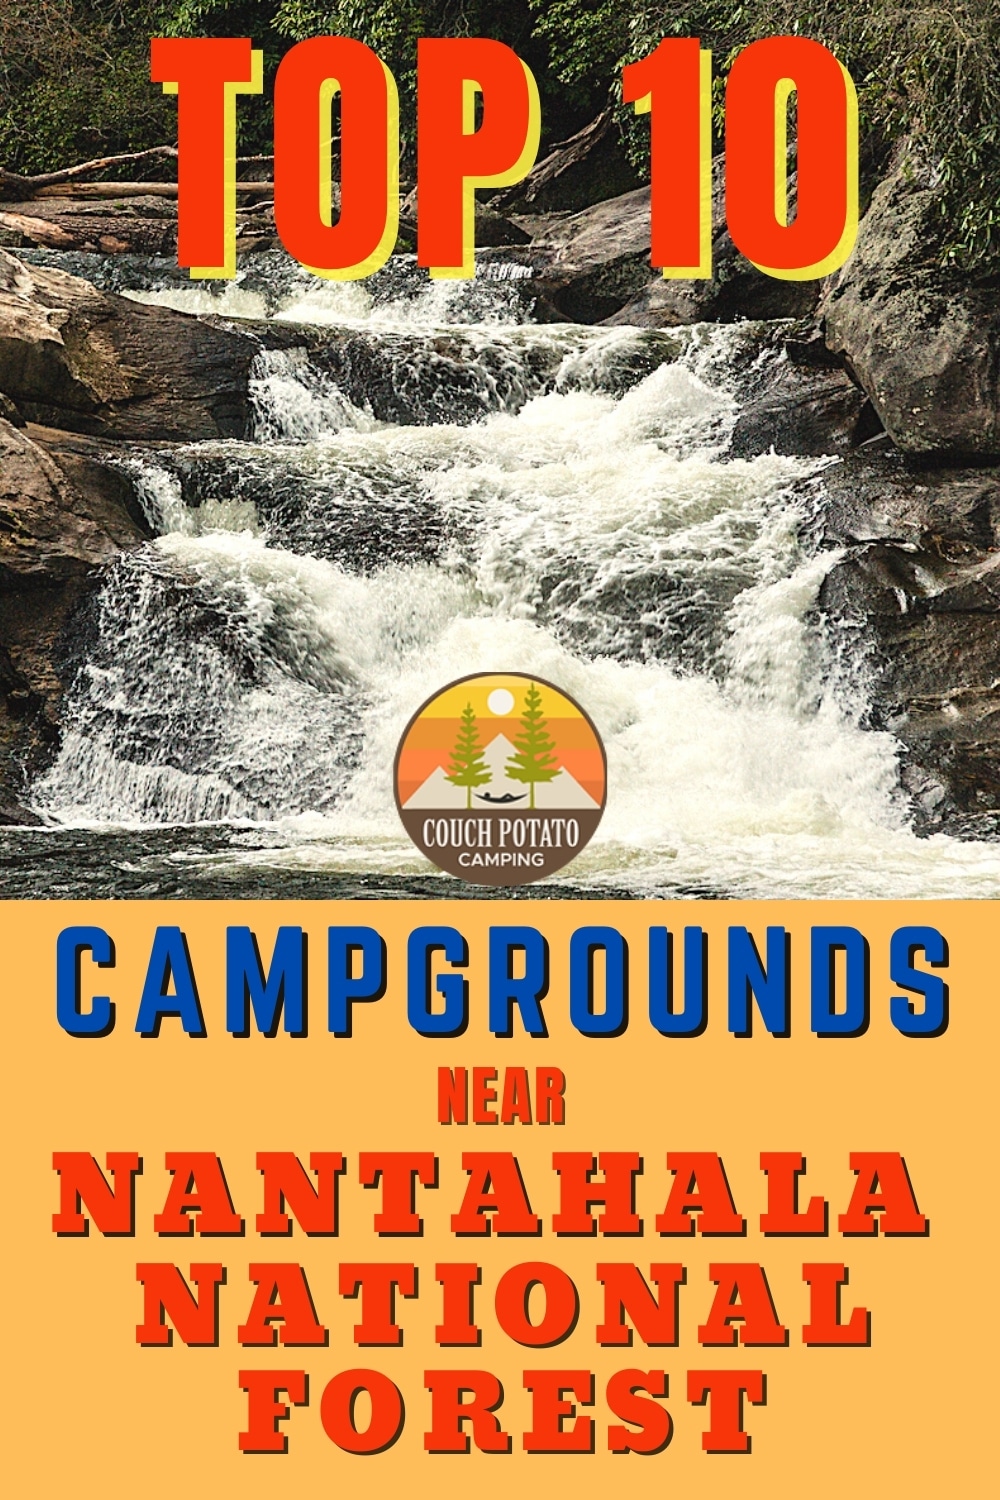 Top 10 Campgrounds Near Nantahala National Forest